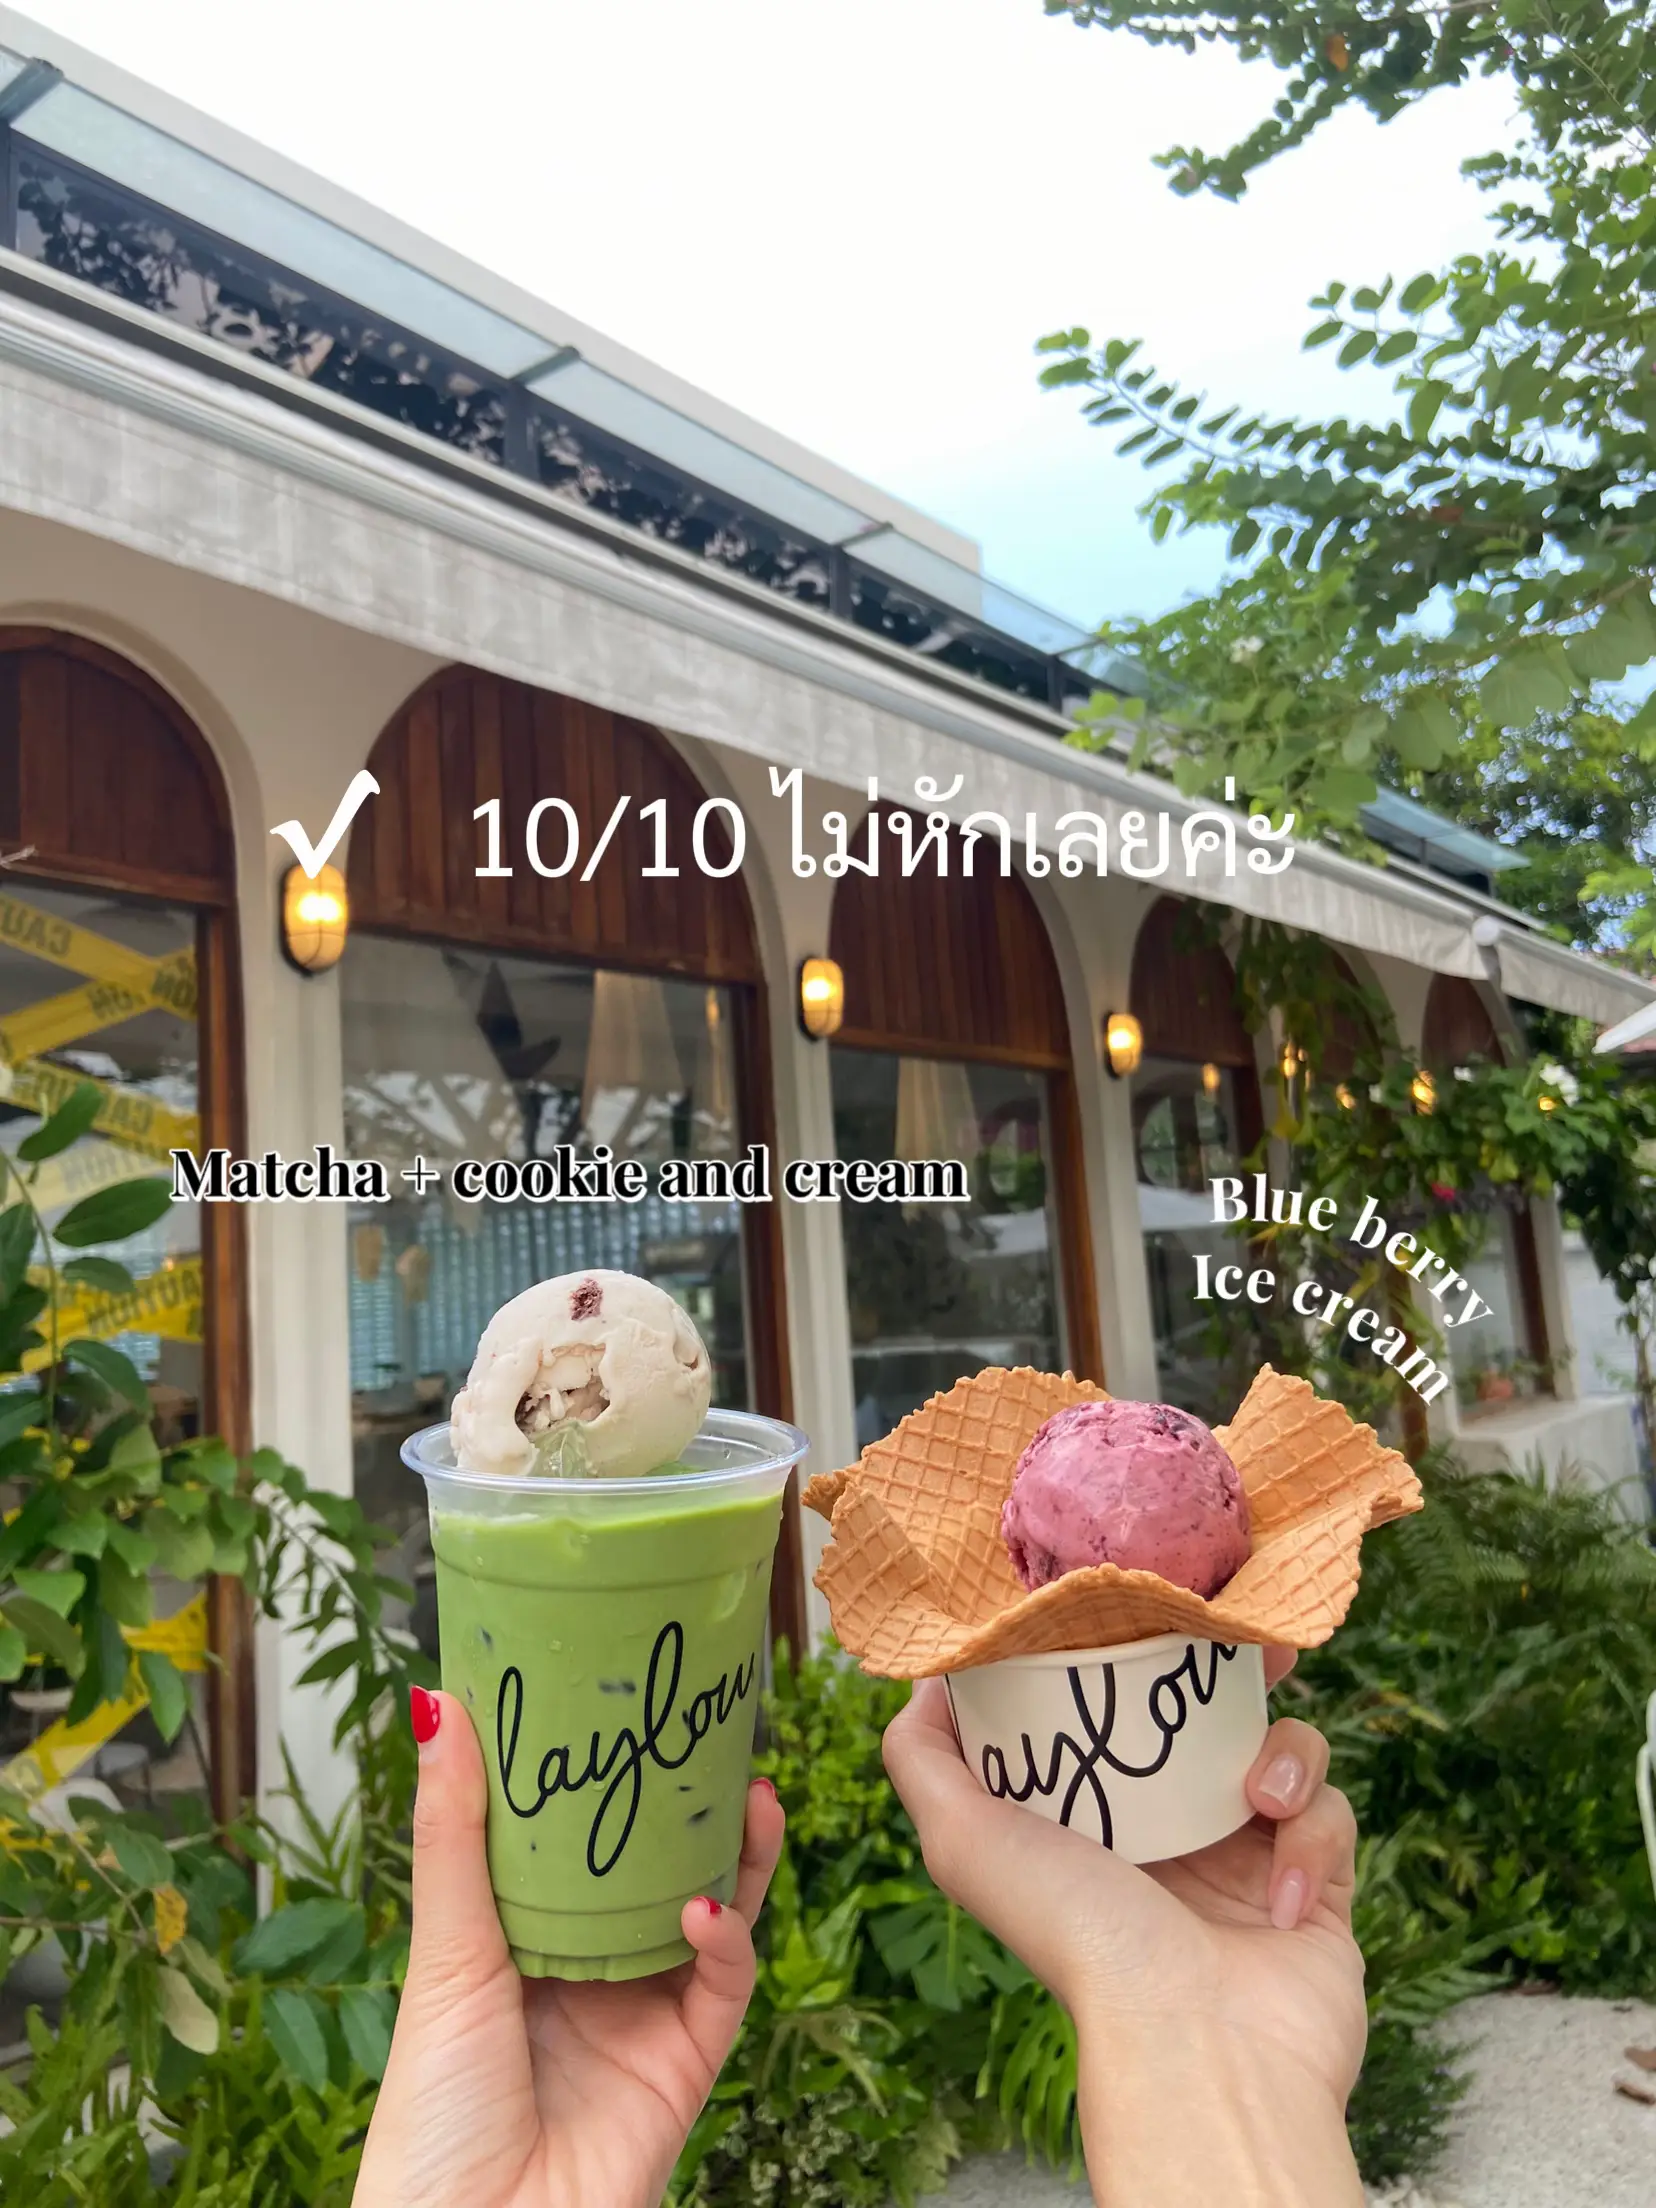 Lay Low Cafe